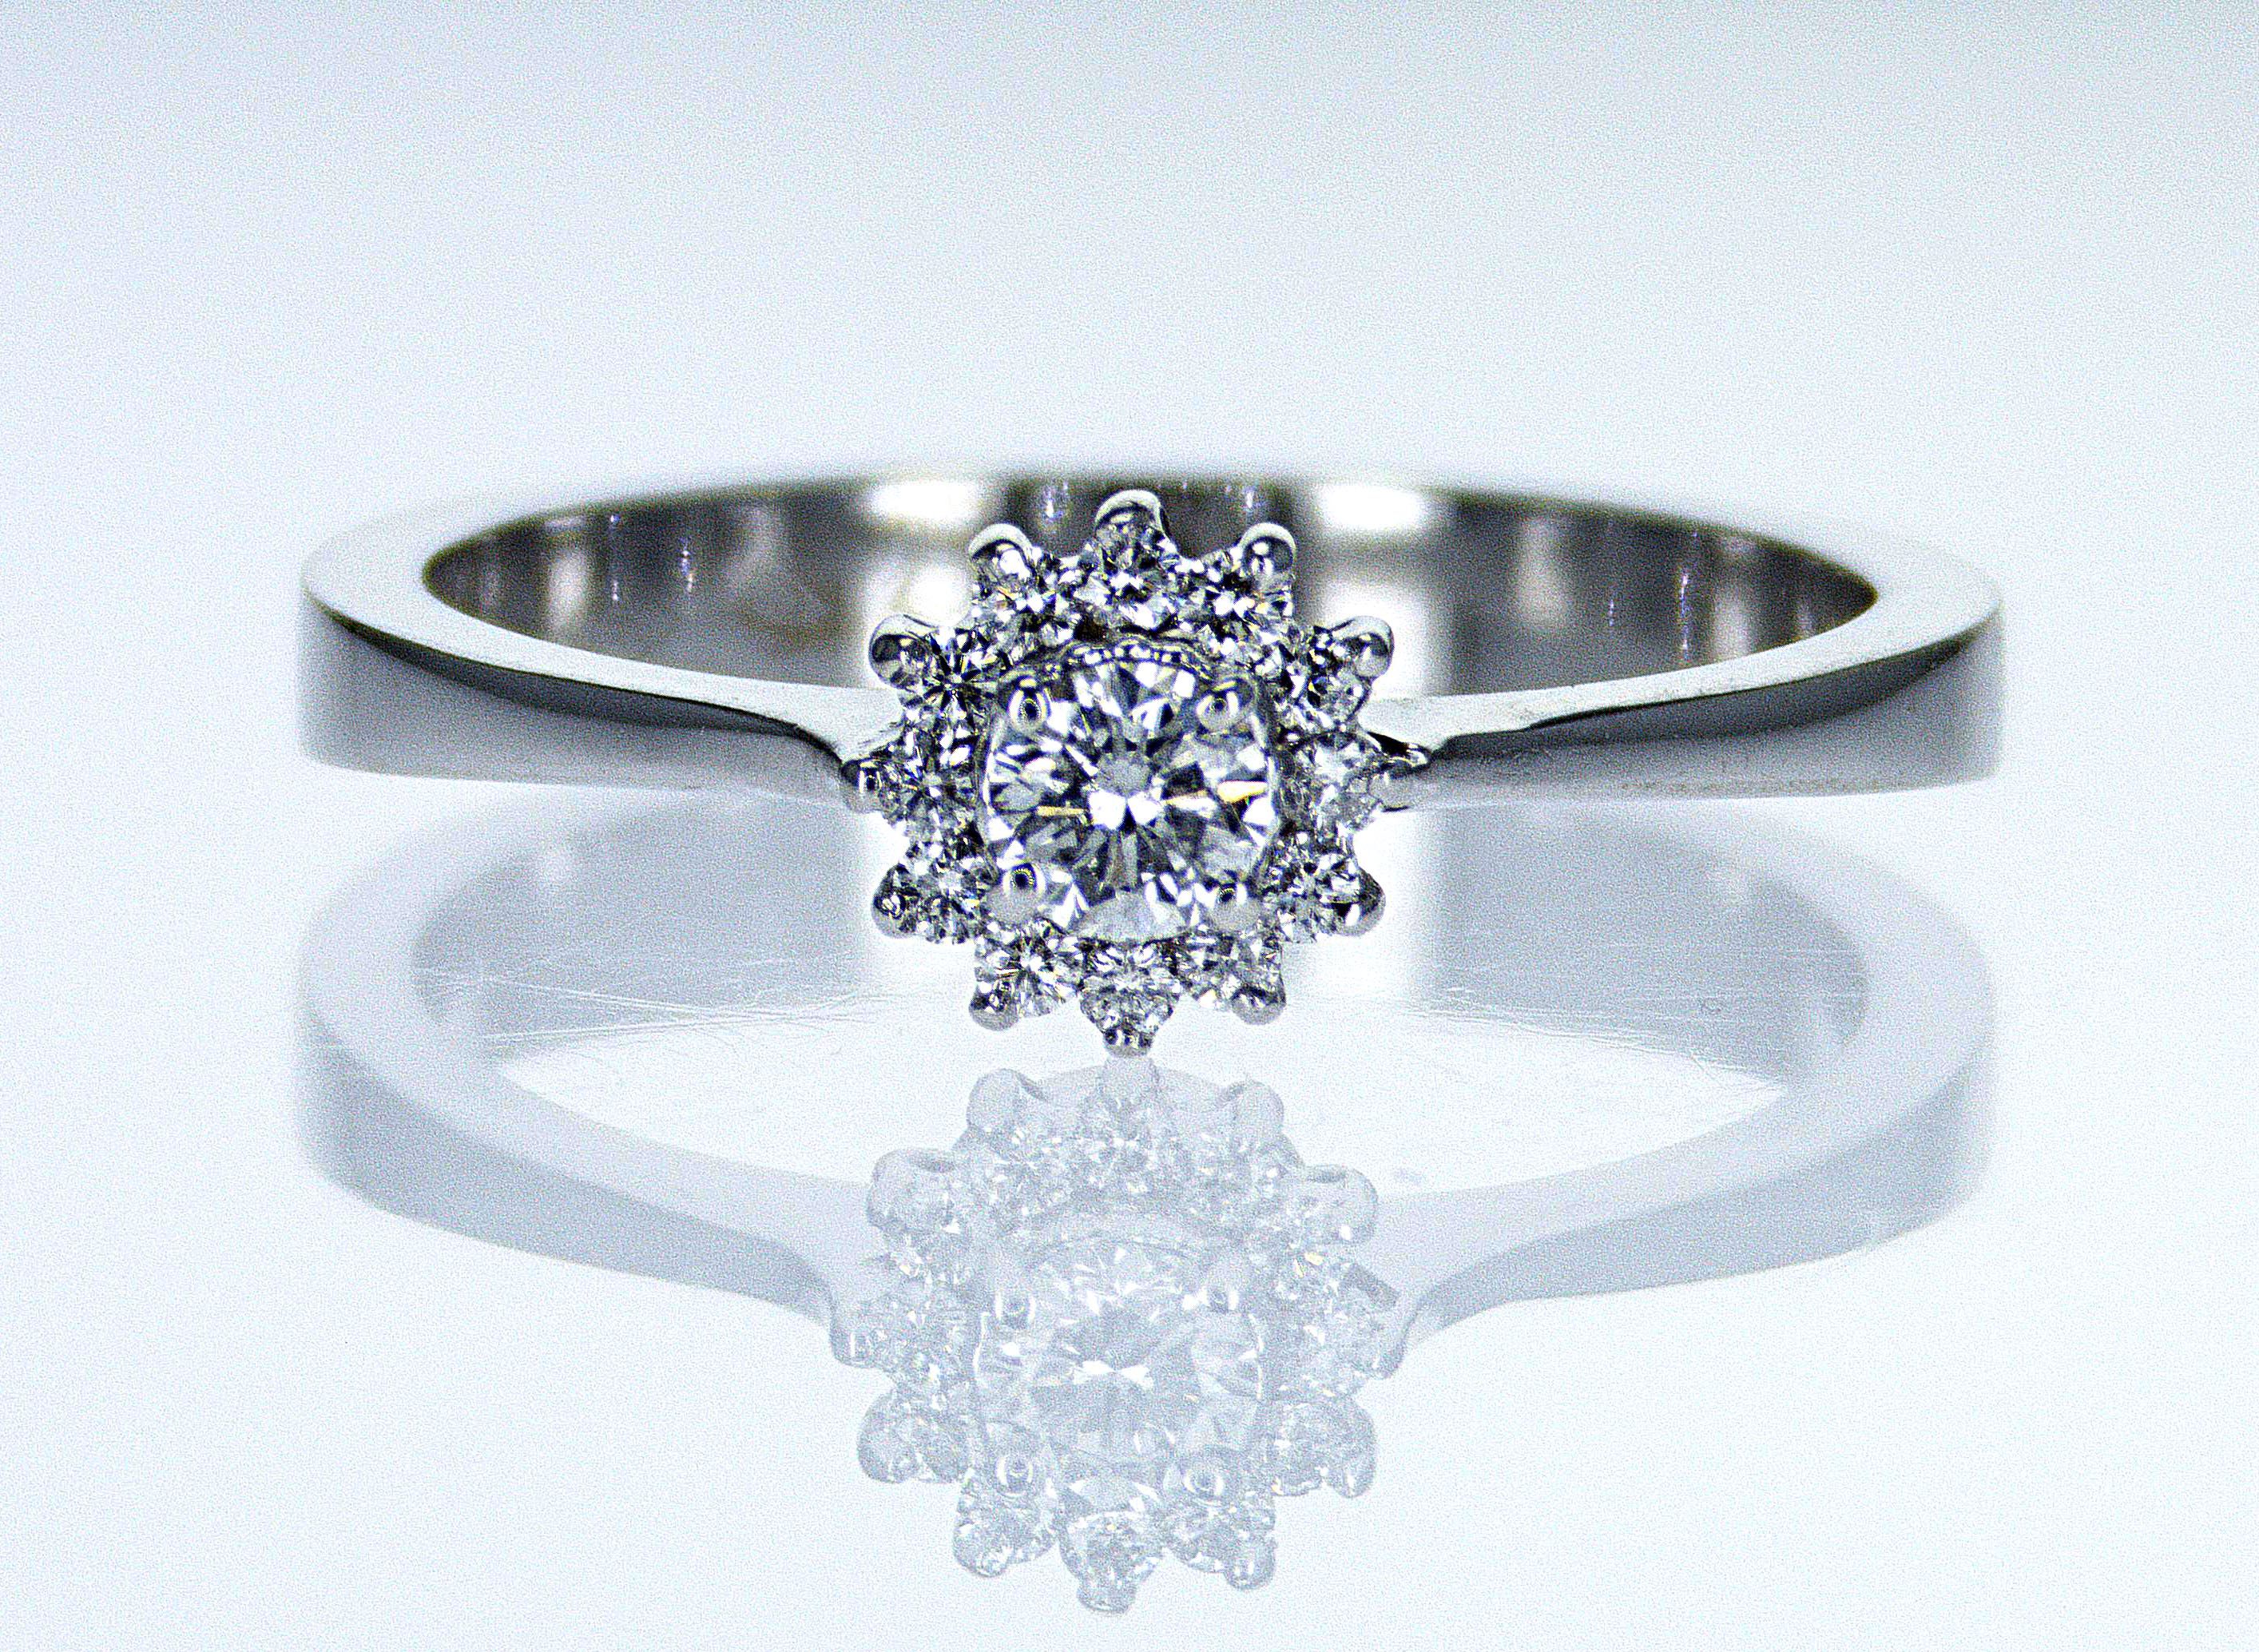 Engagement ring with 0.22ct diamonds, IGL Certified